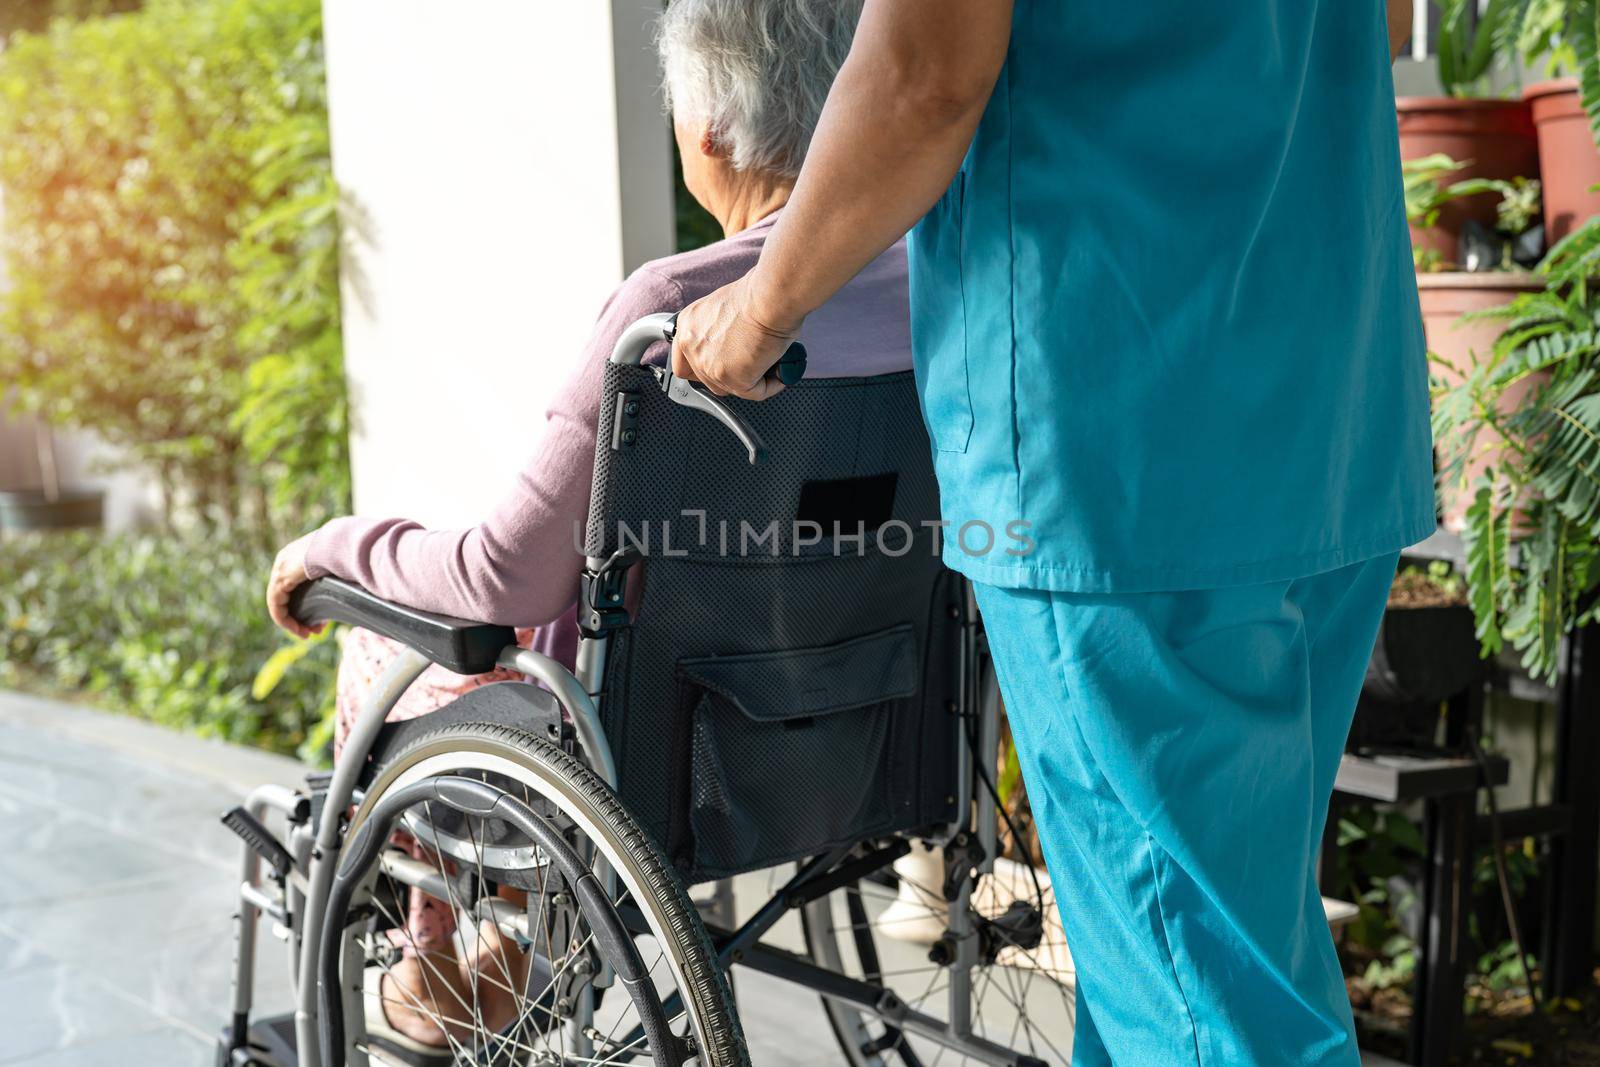 Caregiver help and care Asian senior or elderly old lady woman patient sitting in wheelchair on ramp at nursing hospital, healthy strong medical concept